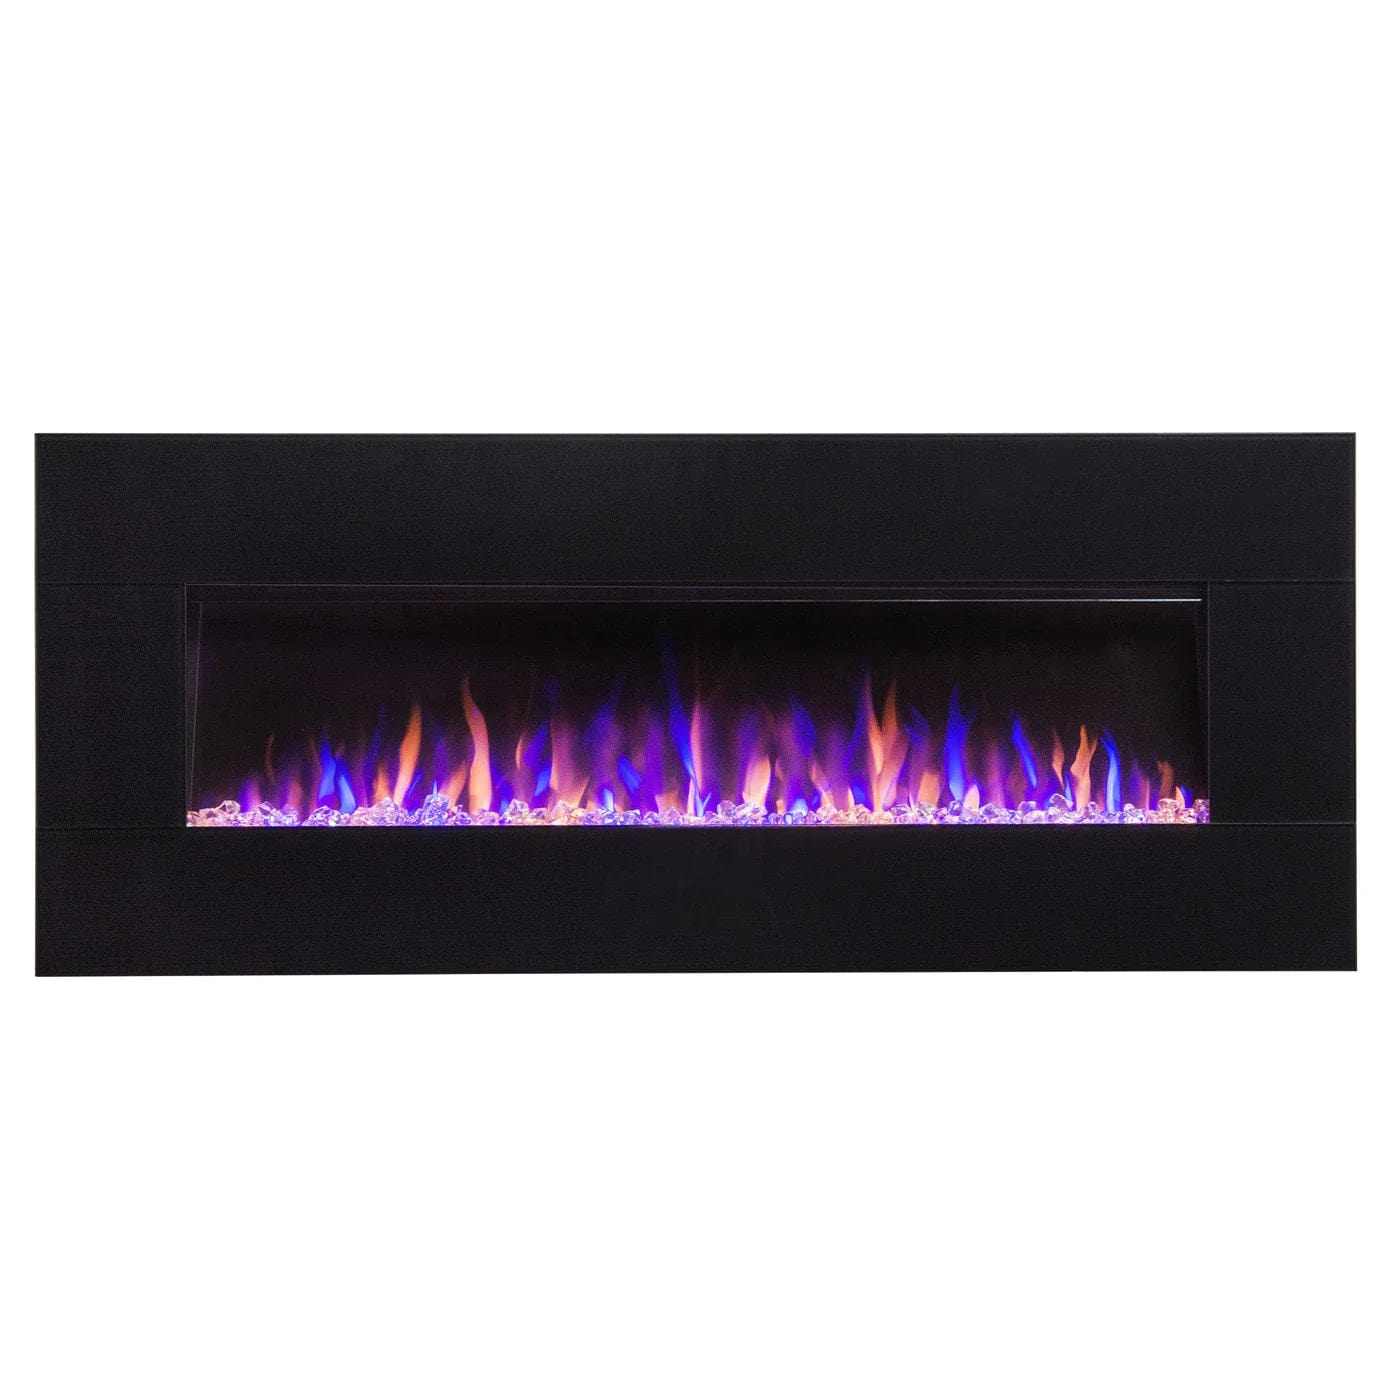 Touchstone 80035 AudioFlare Black Glass 50-Inch Recessed Electric Fireplace